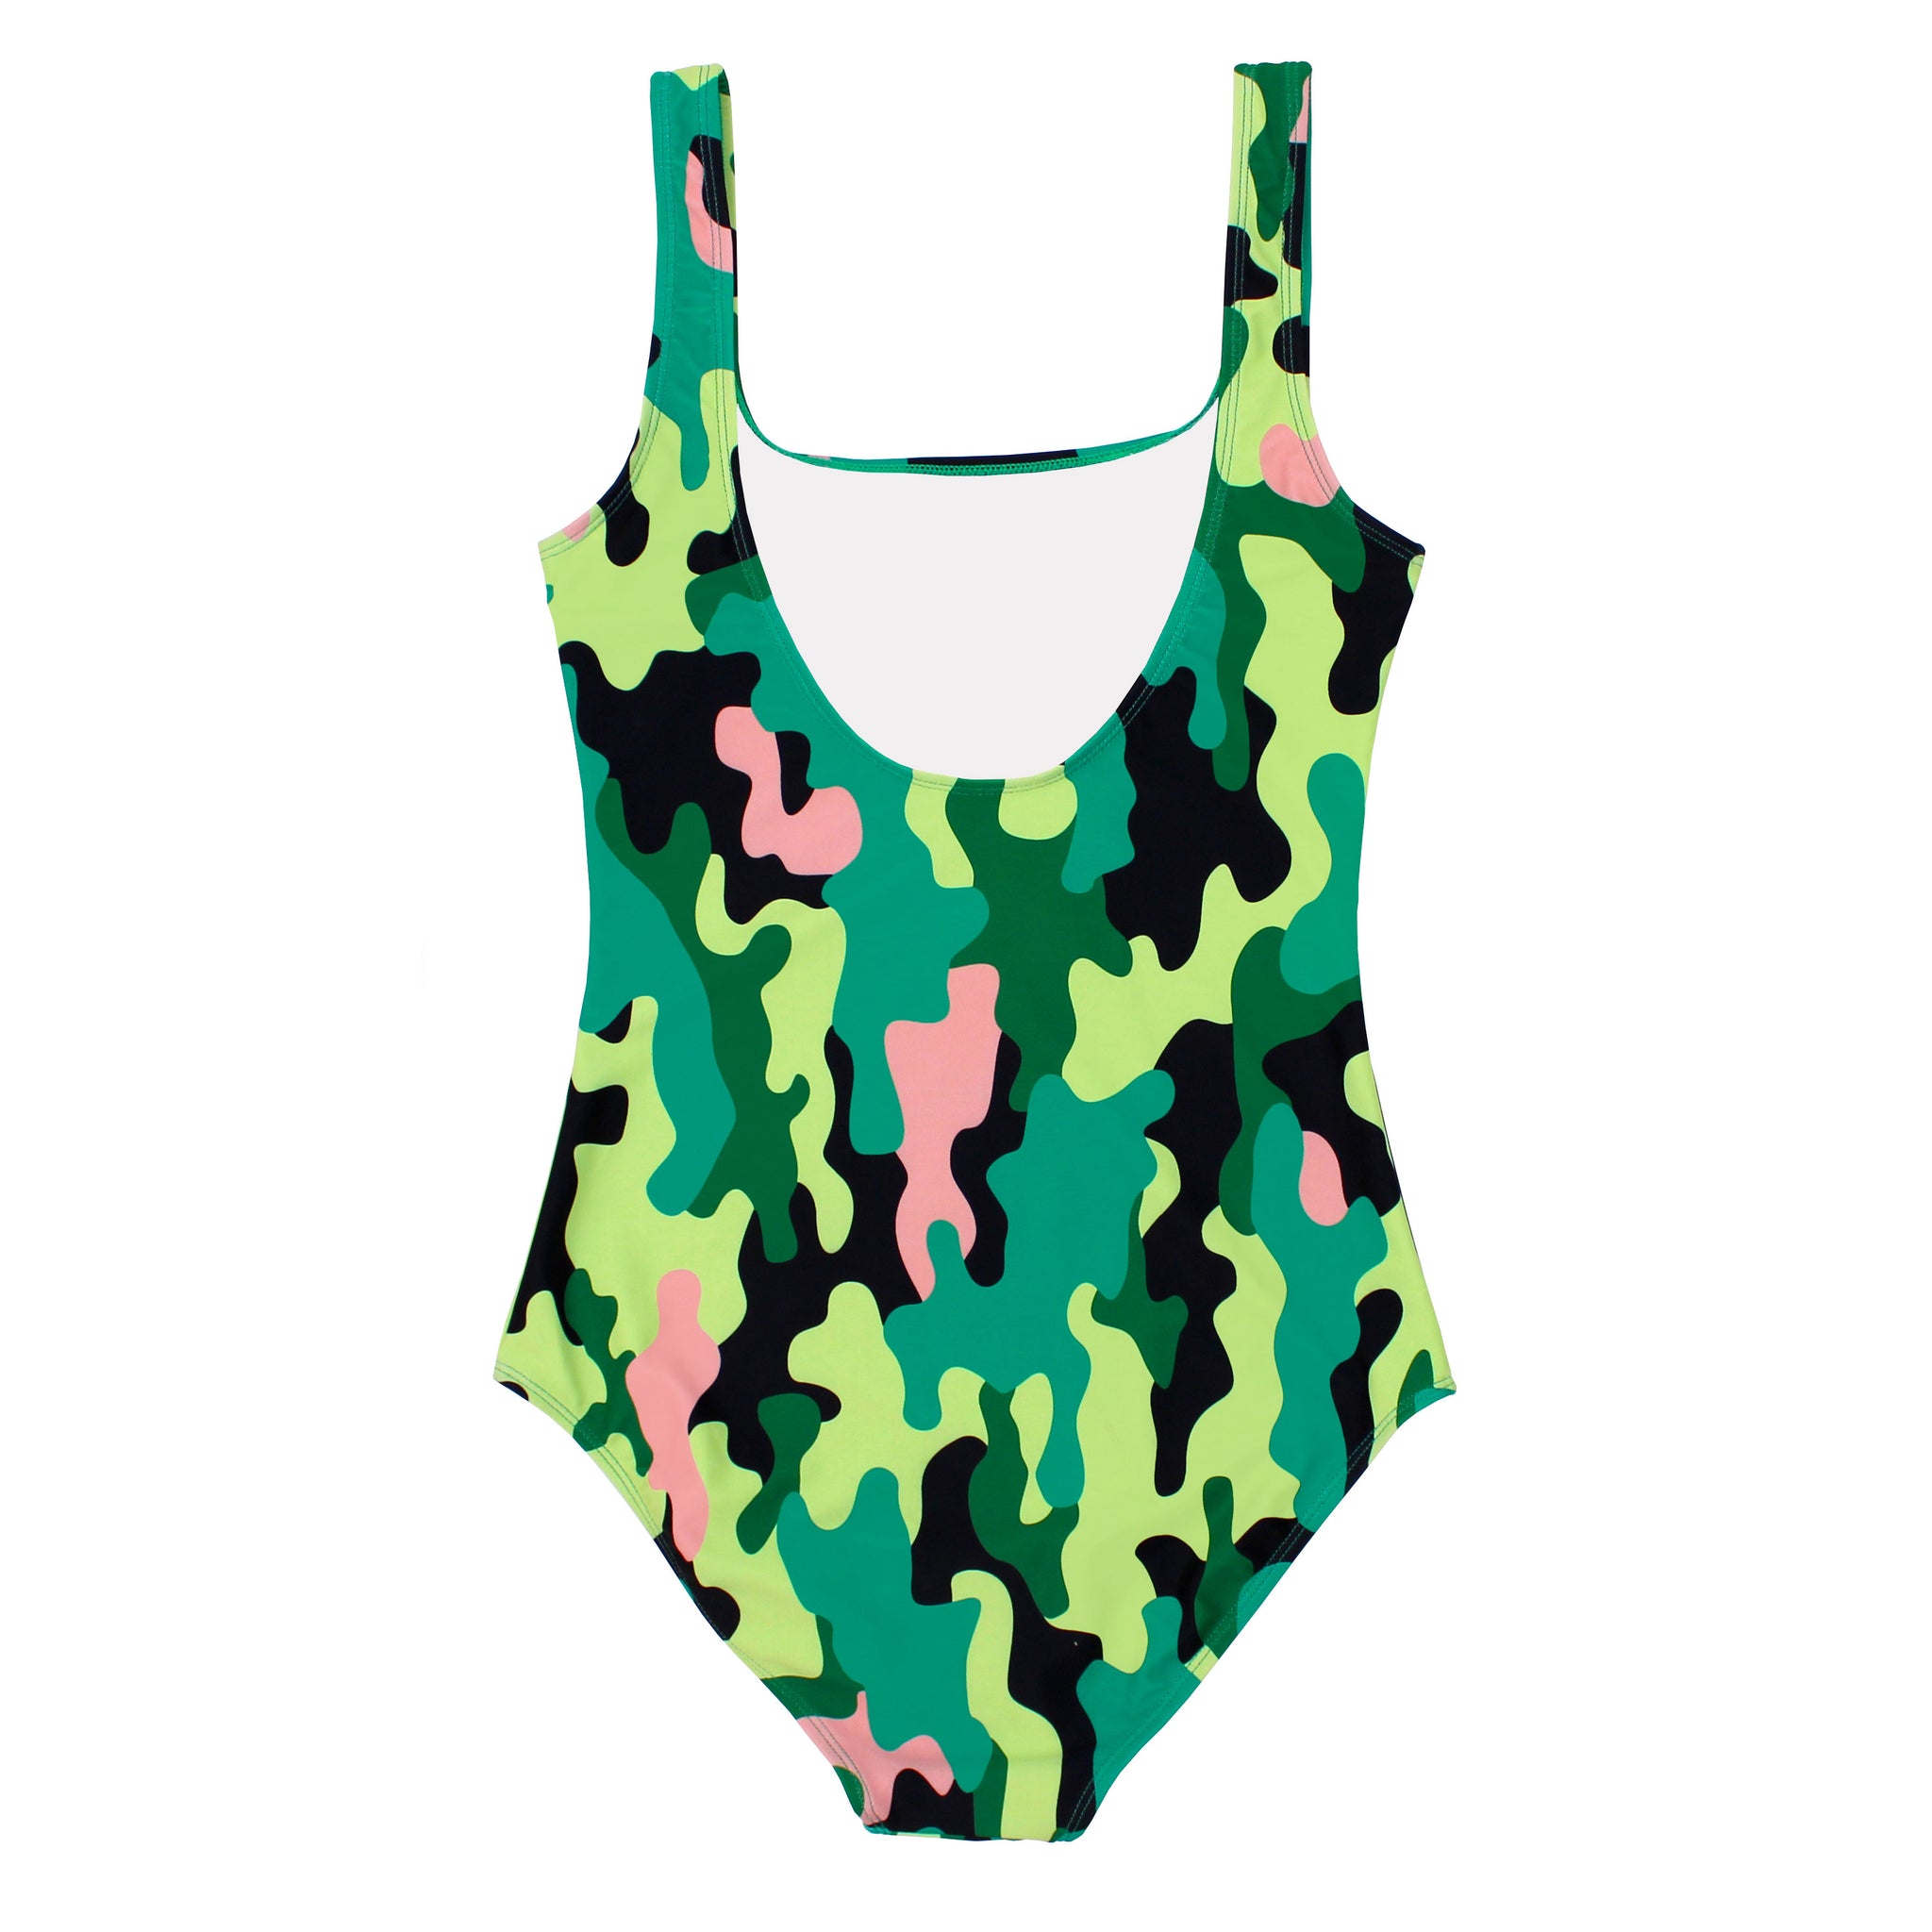 Batoko Camo Swimsuit Made From Recycled Plastic Waste (Back)